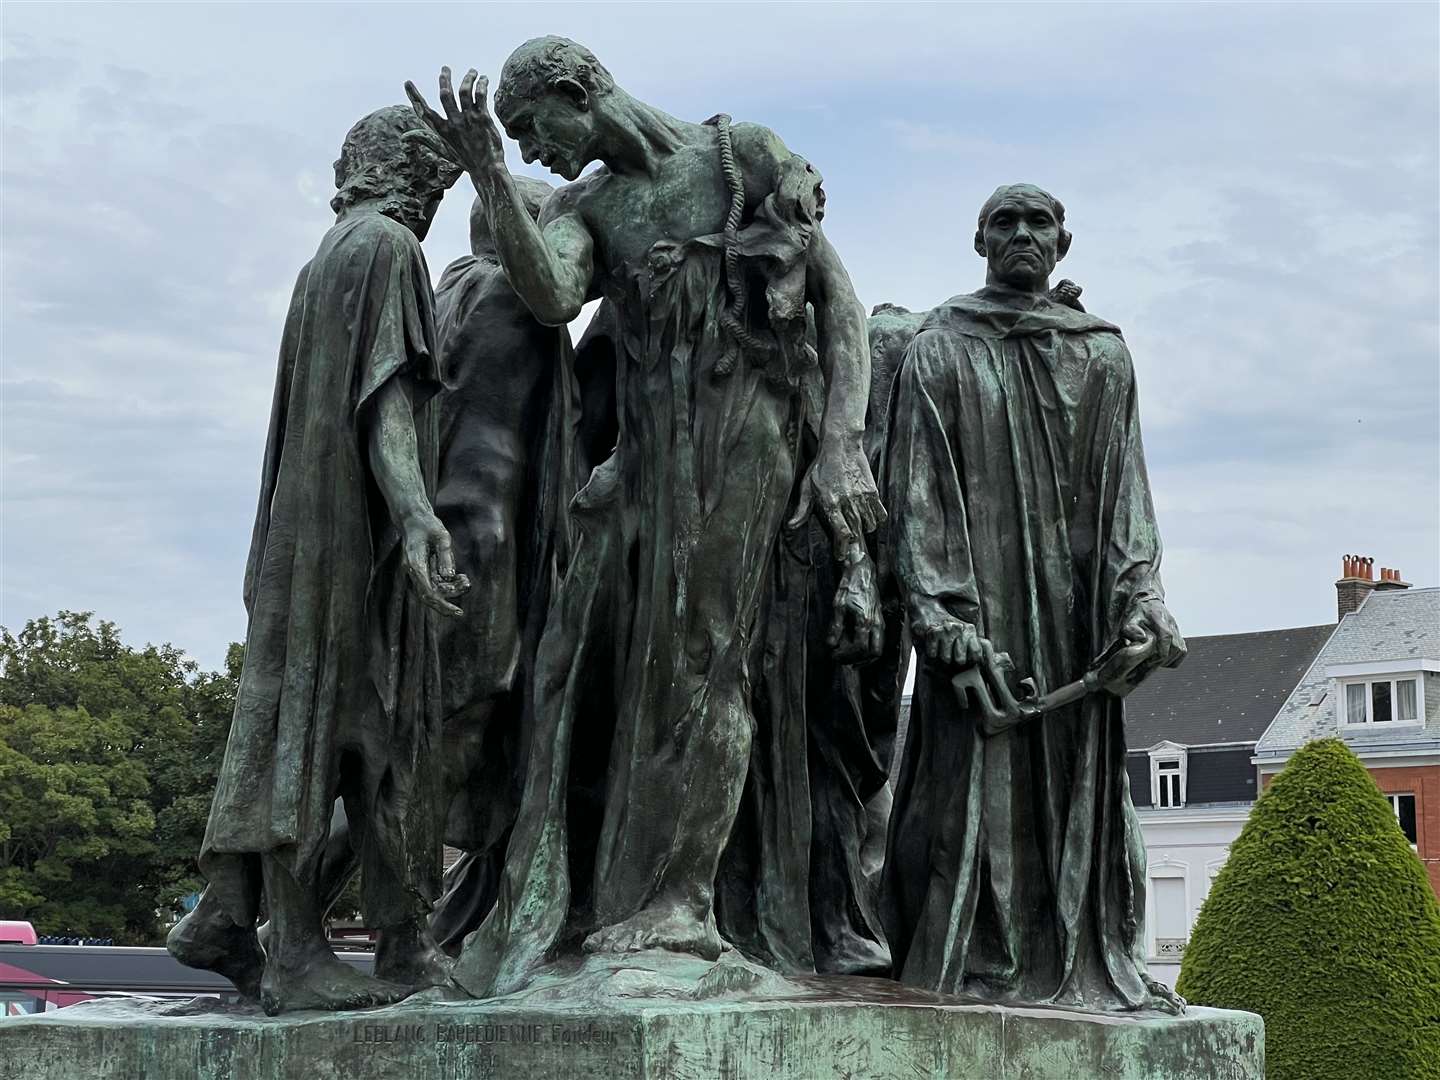 The statue of the Burghers of Calais is the city's most photographed monument.